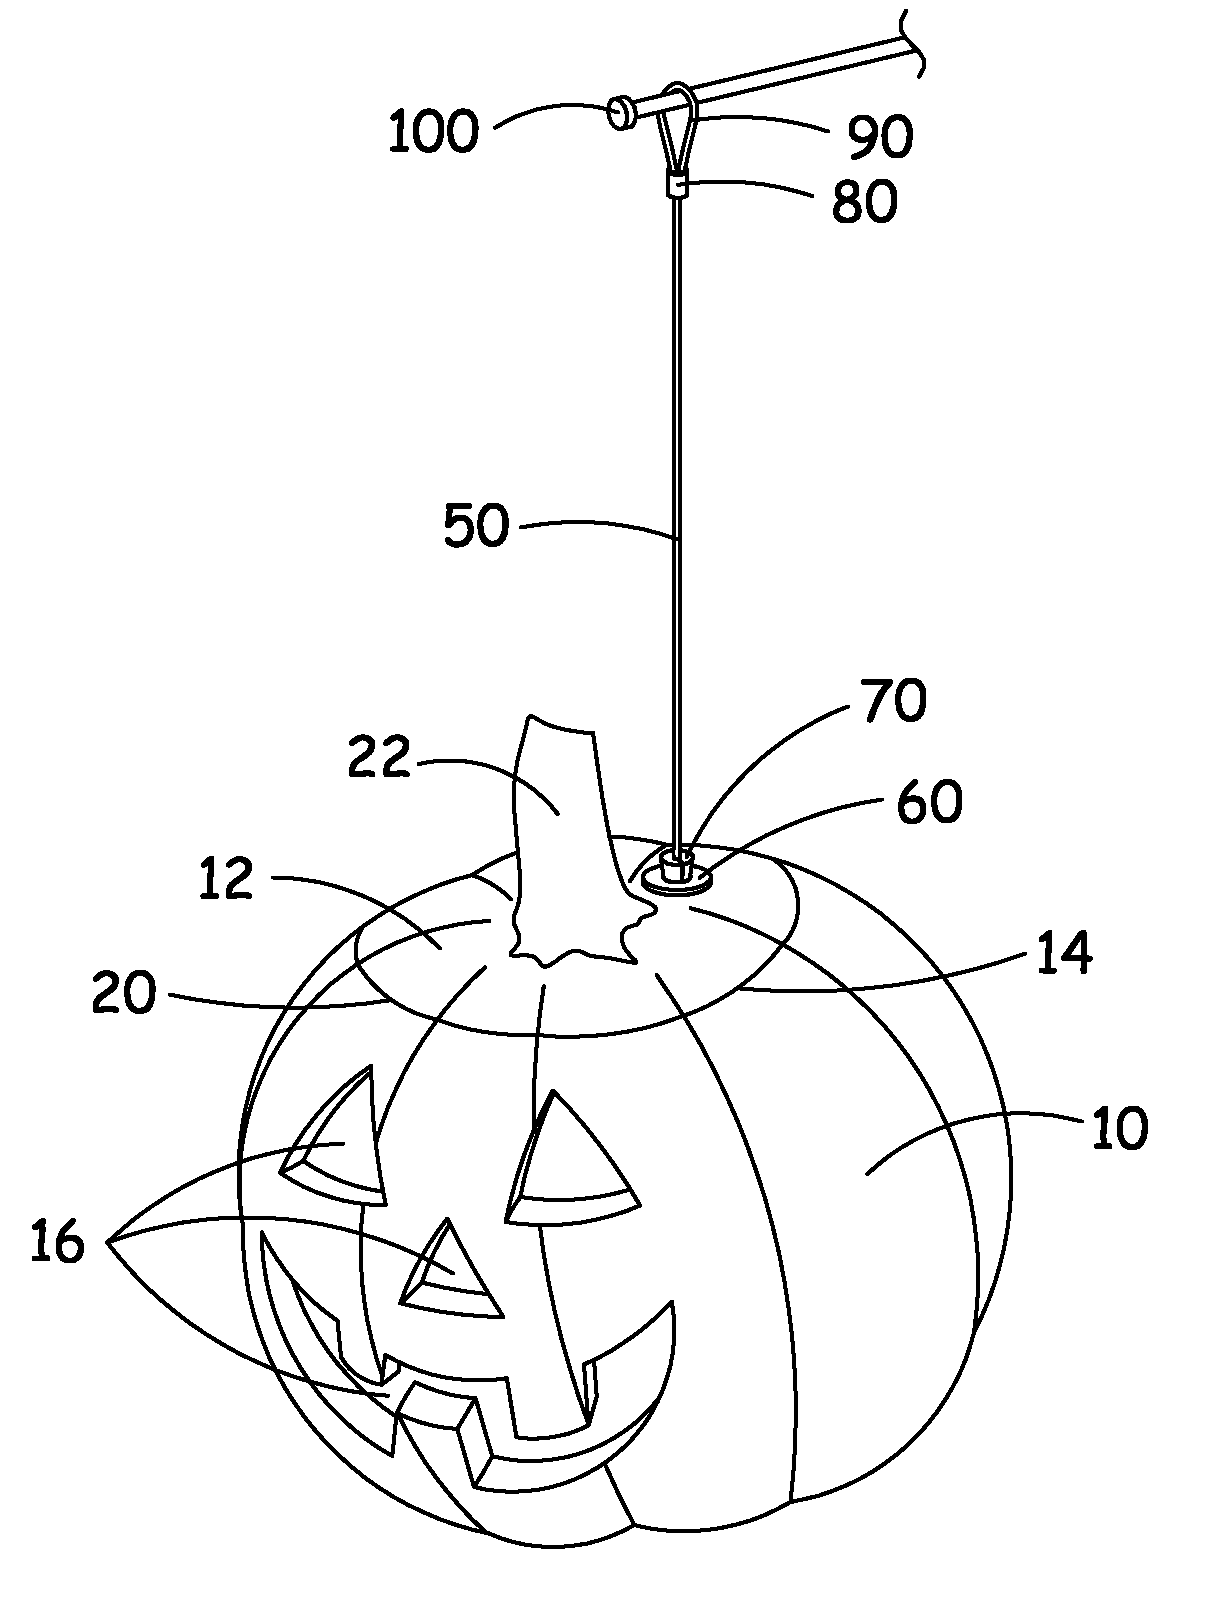 Device and Method for the Suspension of Objects